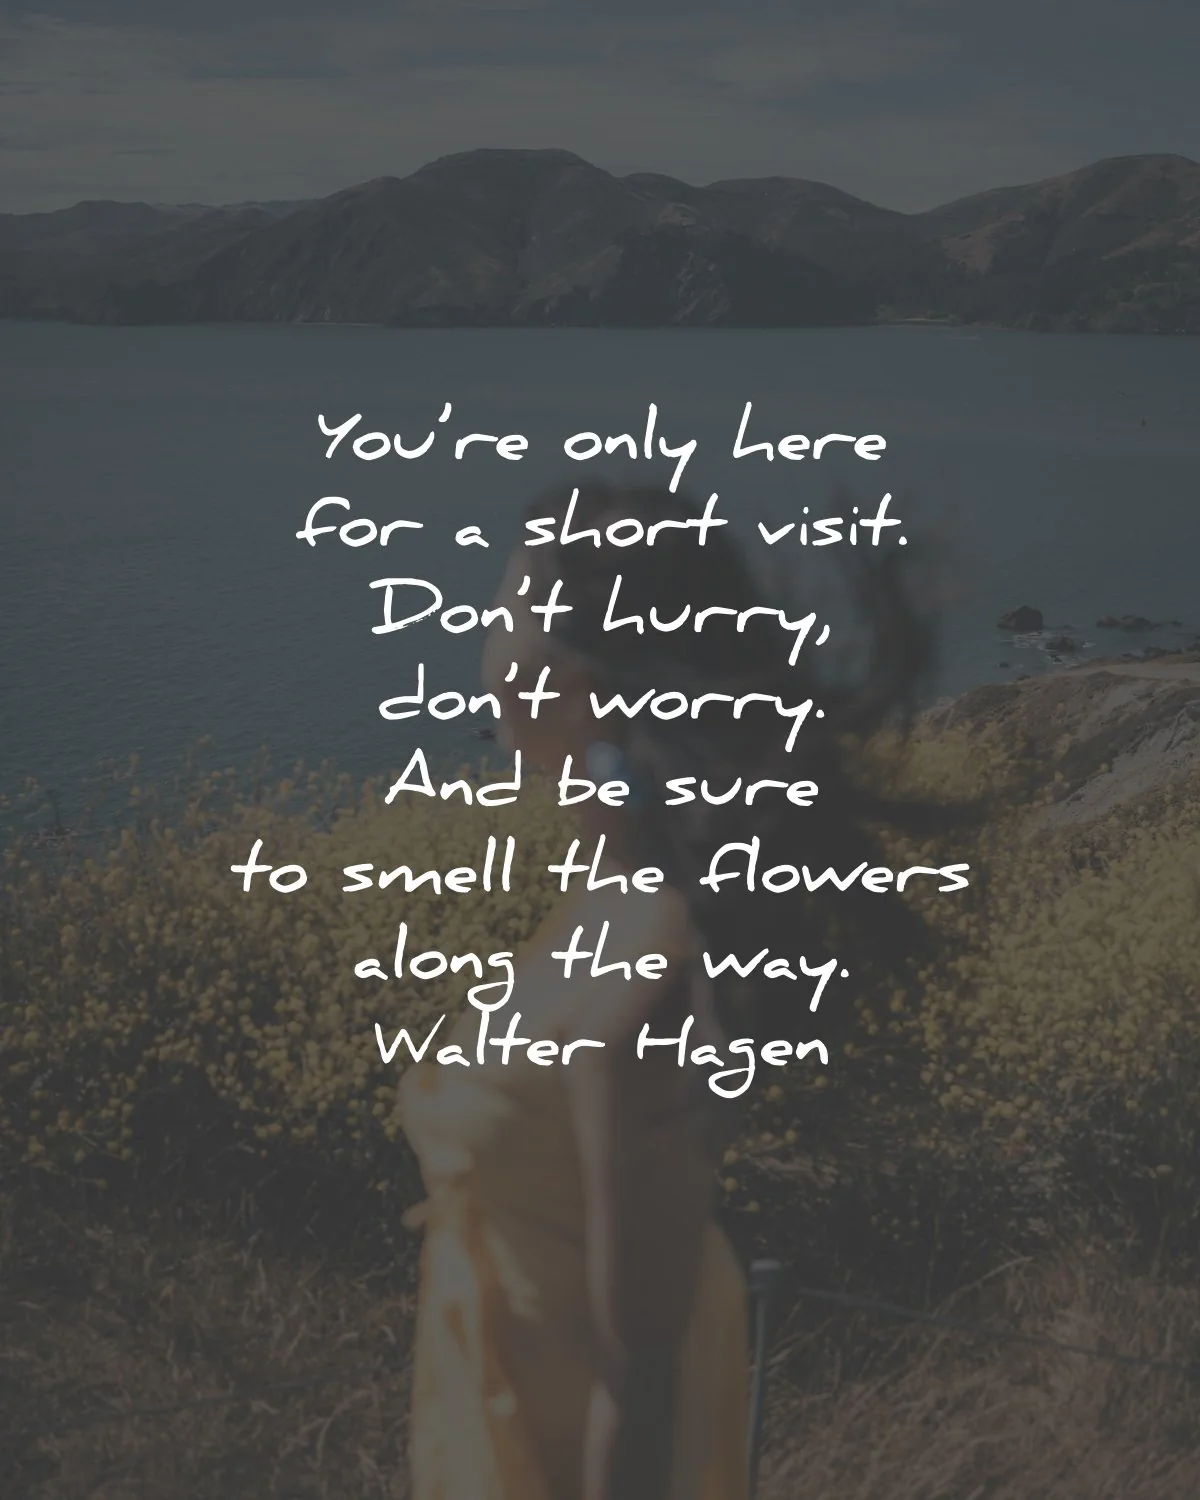 life is short quotes visit hurry worry smell flowers walter hagen wisdom